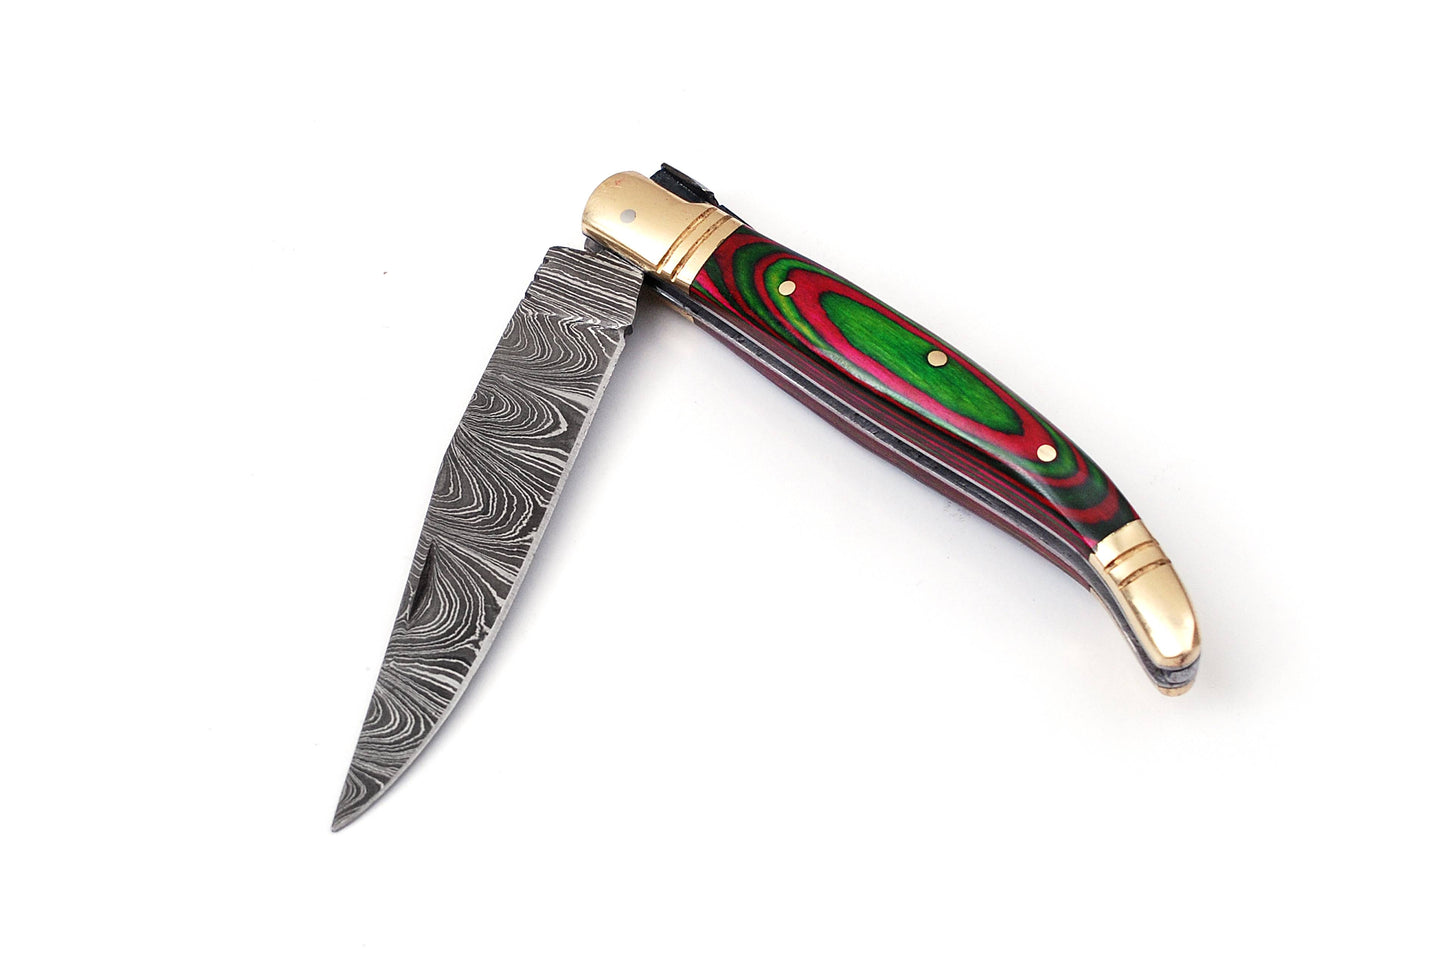 Copy of Copy of Laguiole Folding Damascus steel knife, 8.5" Long with 4" hand forged custom twist pattern Blade. Red & Green wood scale with brass bolster, Cow hide leather sheath included